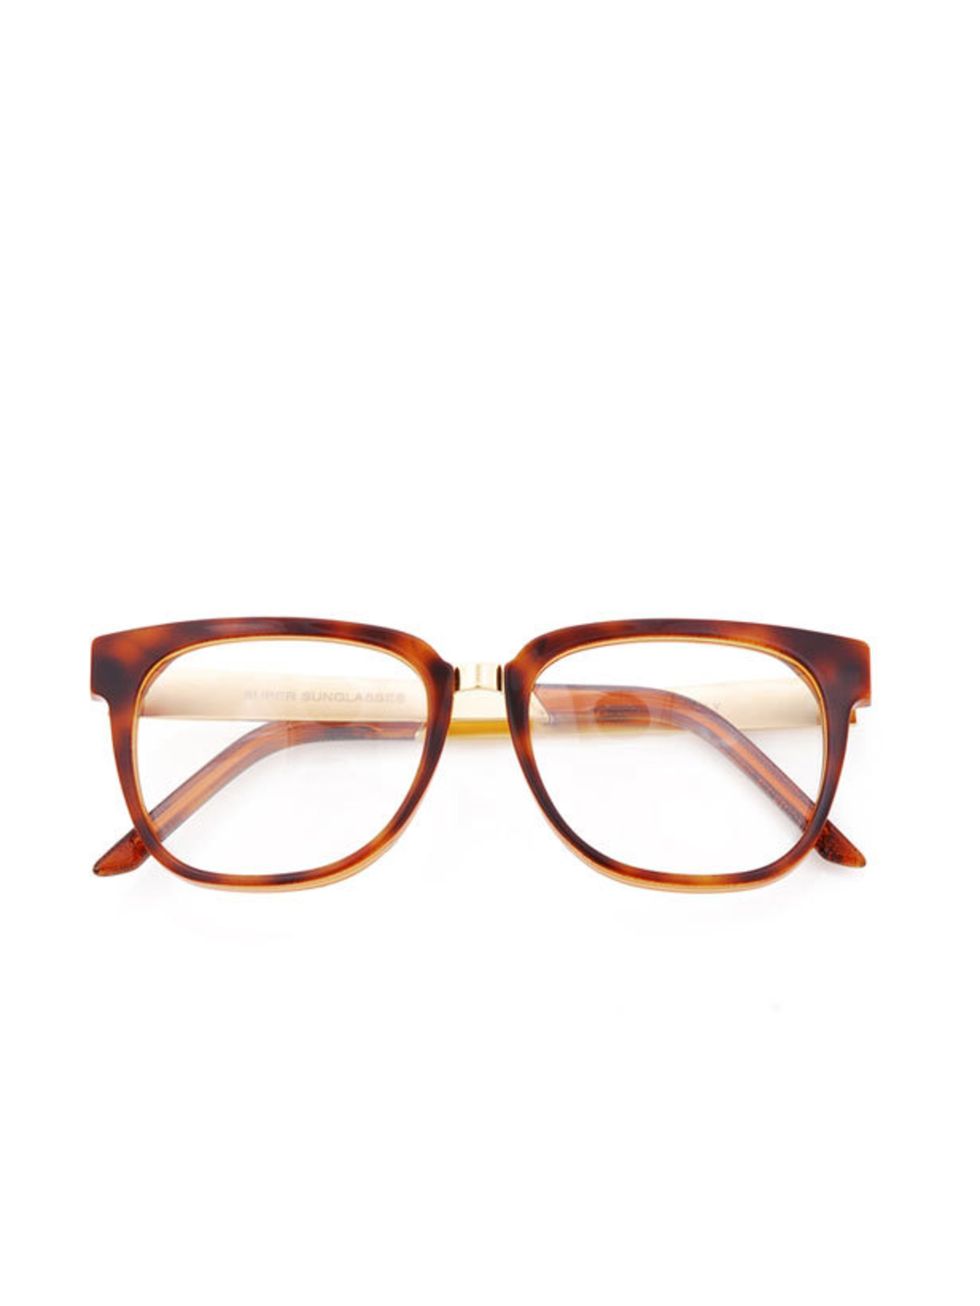 <p>These glasses can be worn at anytime of the year and will add a quirky yet cool edge to your working wardrobe. Super tortoisheshell glasses, £134, at <a href="http://goodhoodstore.com/?page=51&amp;id=1281&amp;type=womens">Goodhood</a> </p>